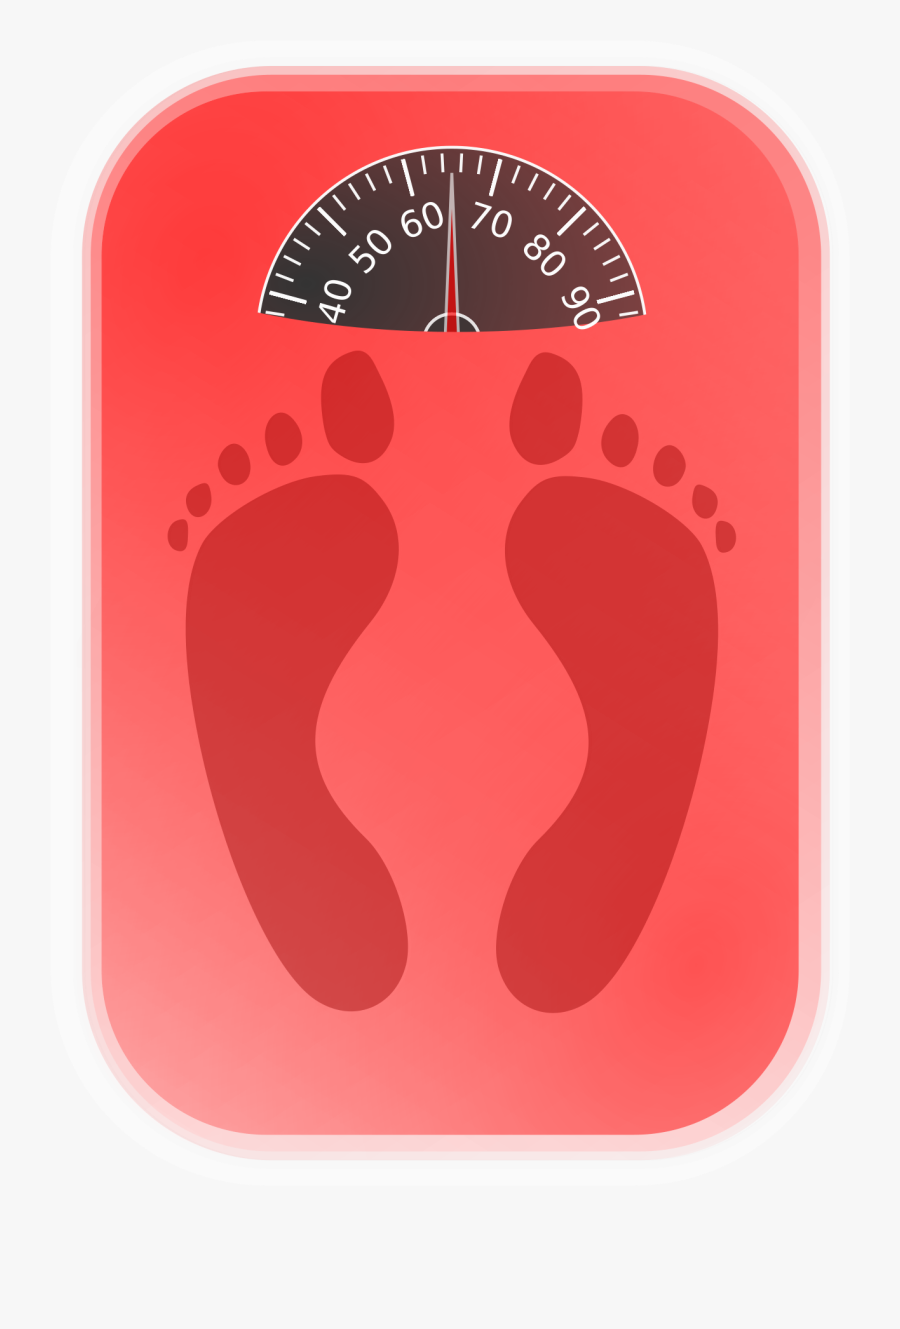 Clipart - Weighing Scale, Transparent Clipart